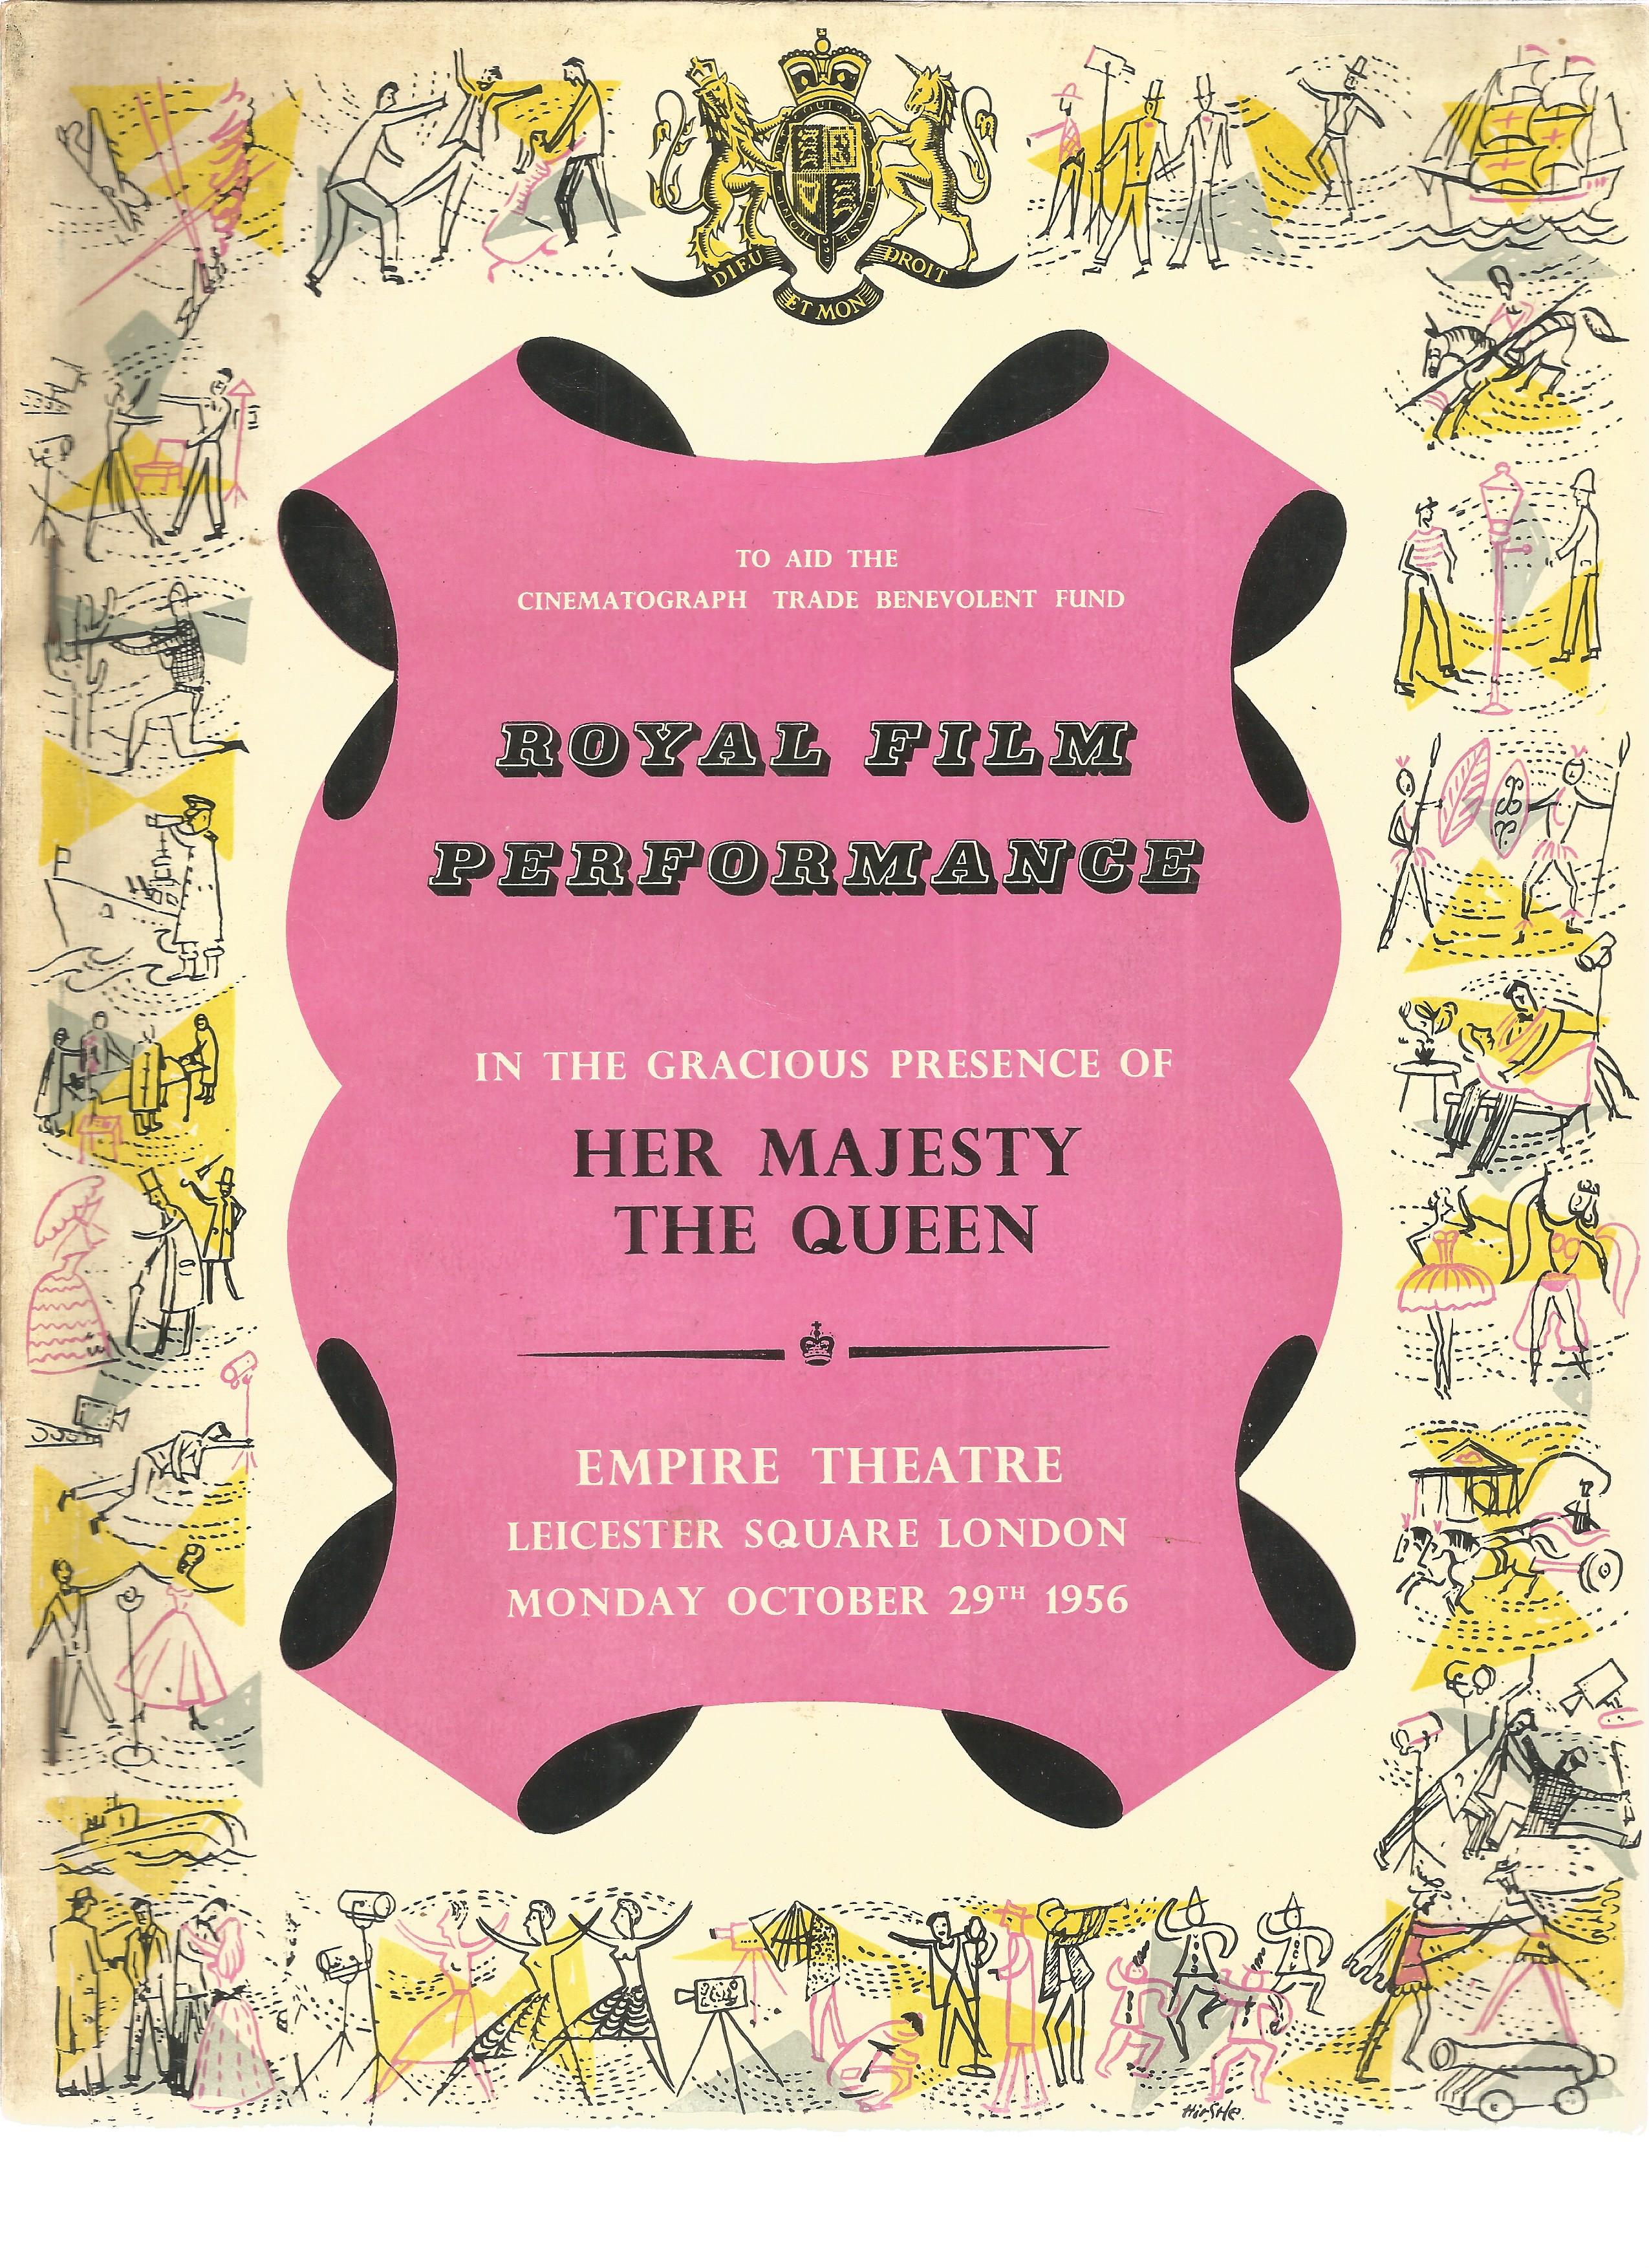 Royal Film Performance souvenir programme taken from Empire Theatre, Leicester Square, Monday 29th